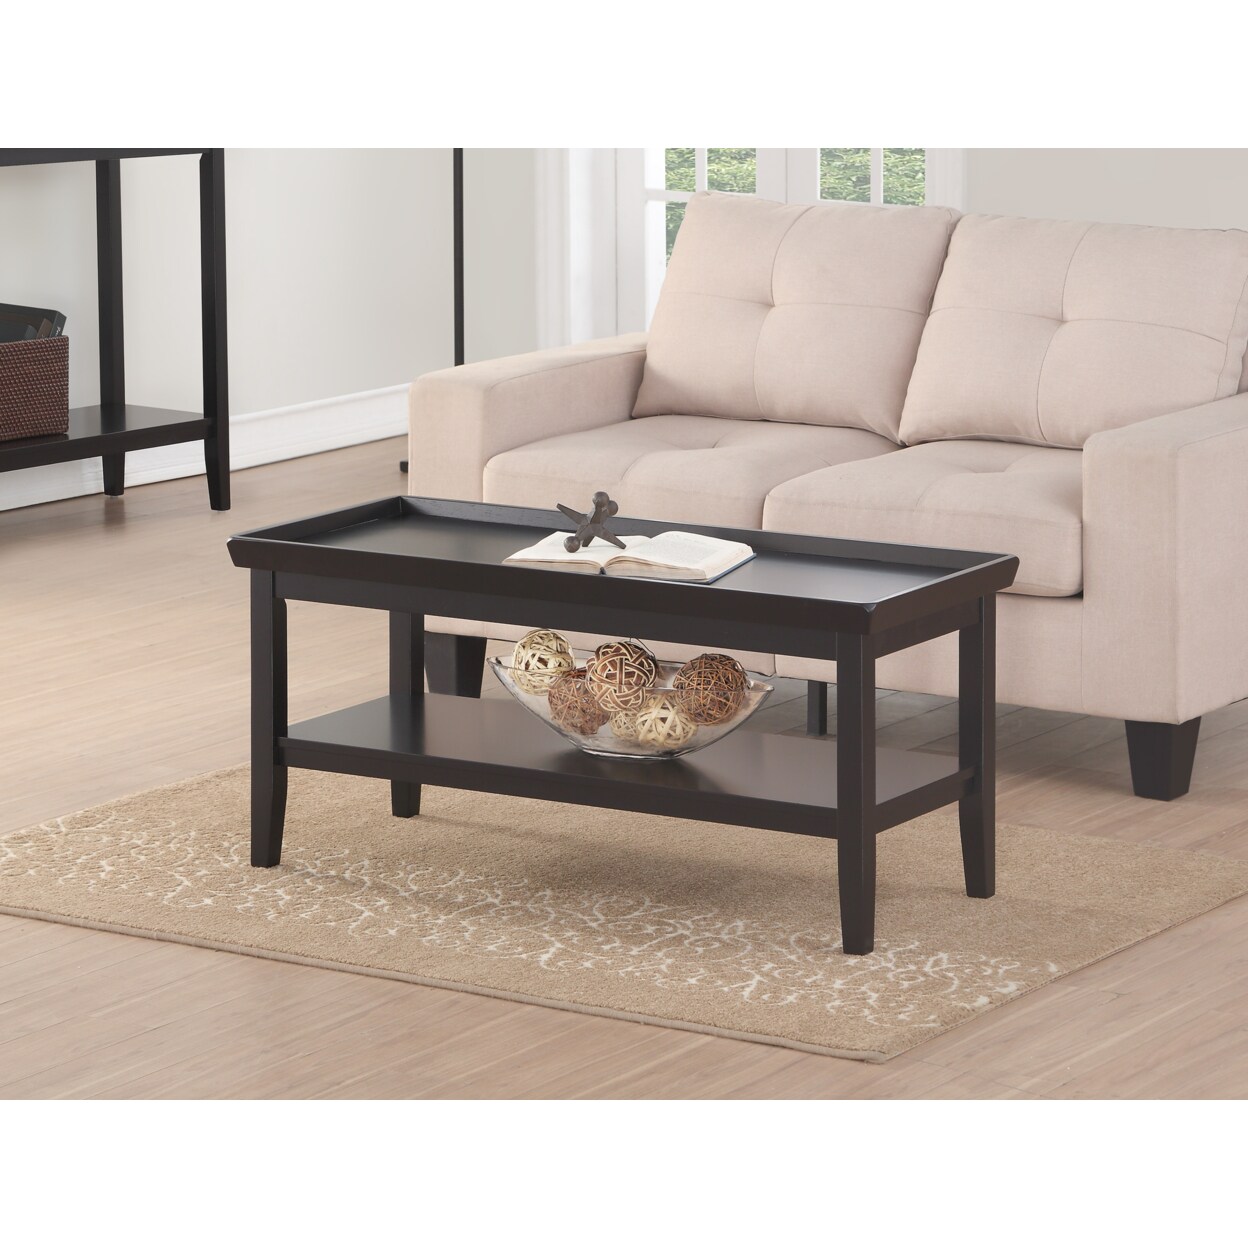 Convenience Concepts Ledgewood Coffee Table, Black Michaels